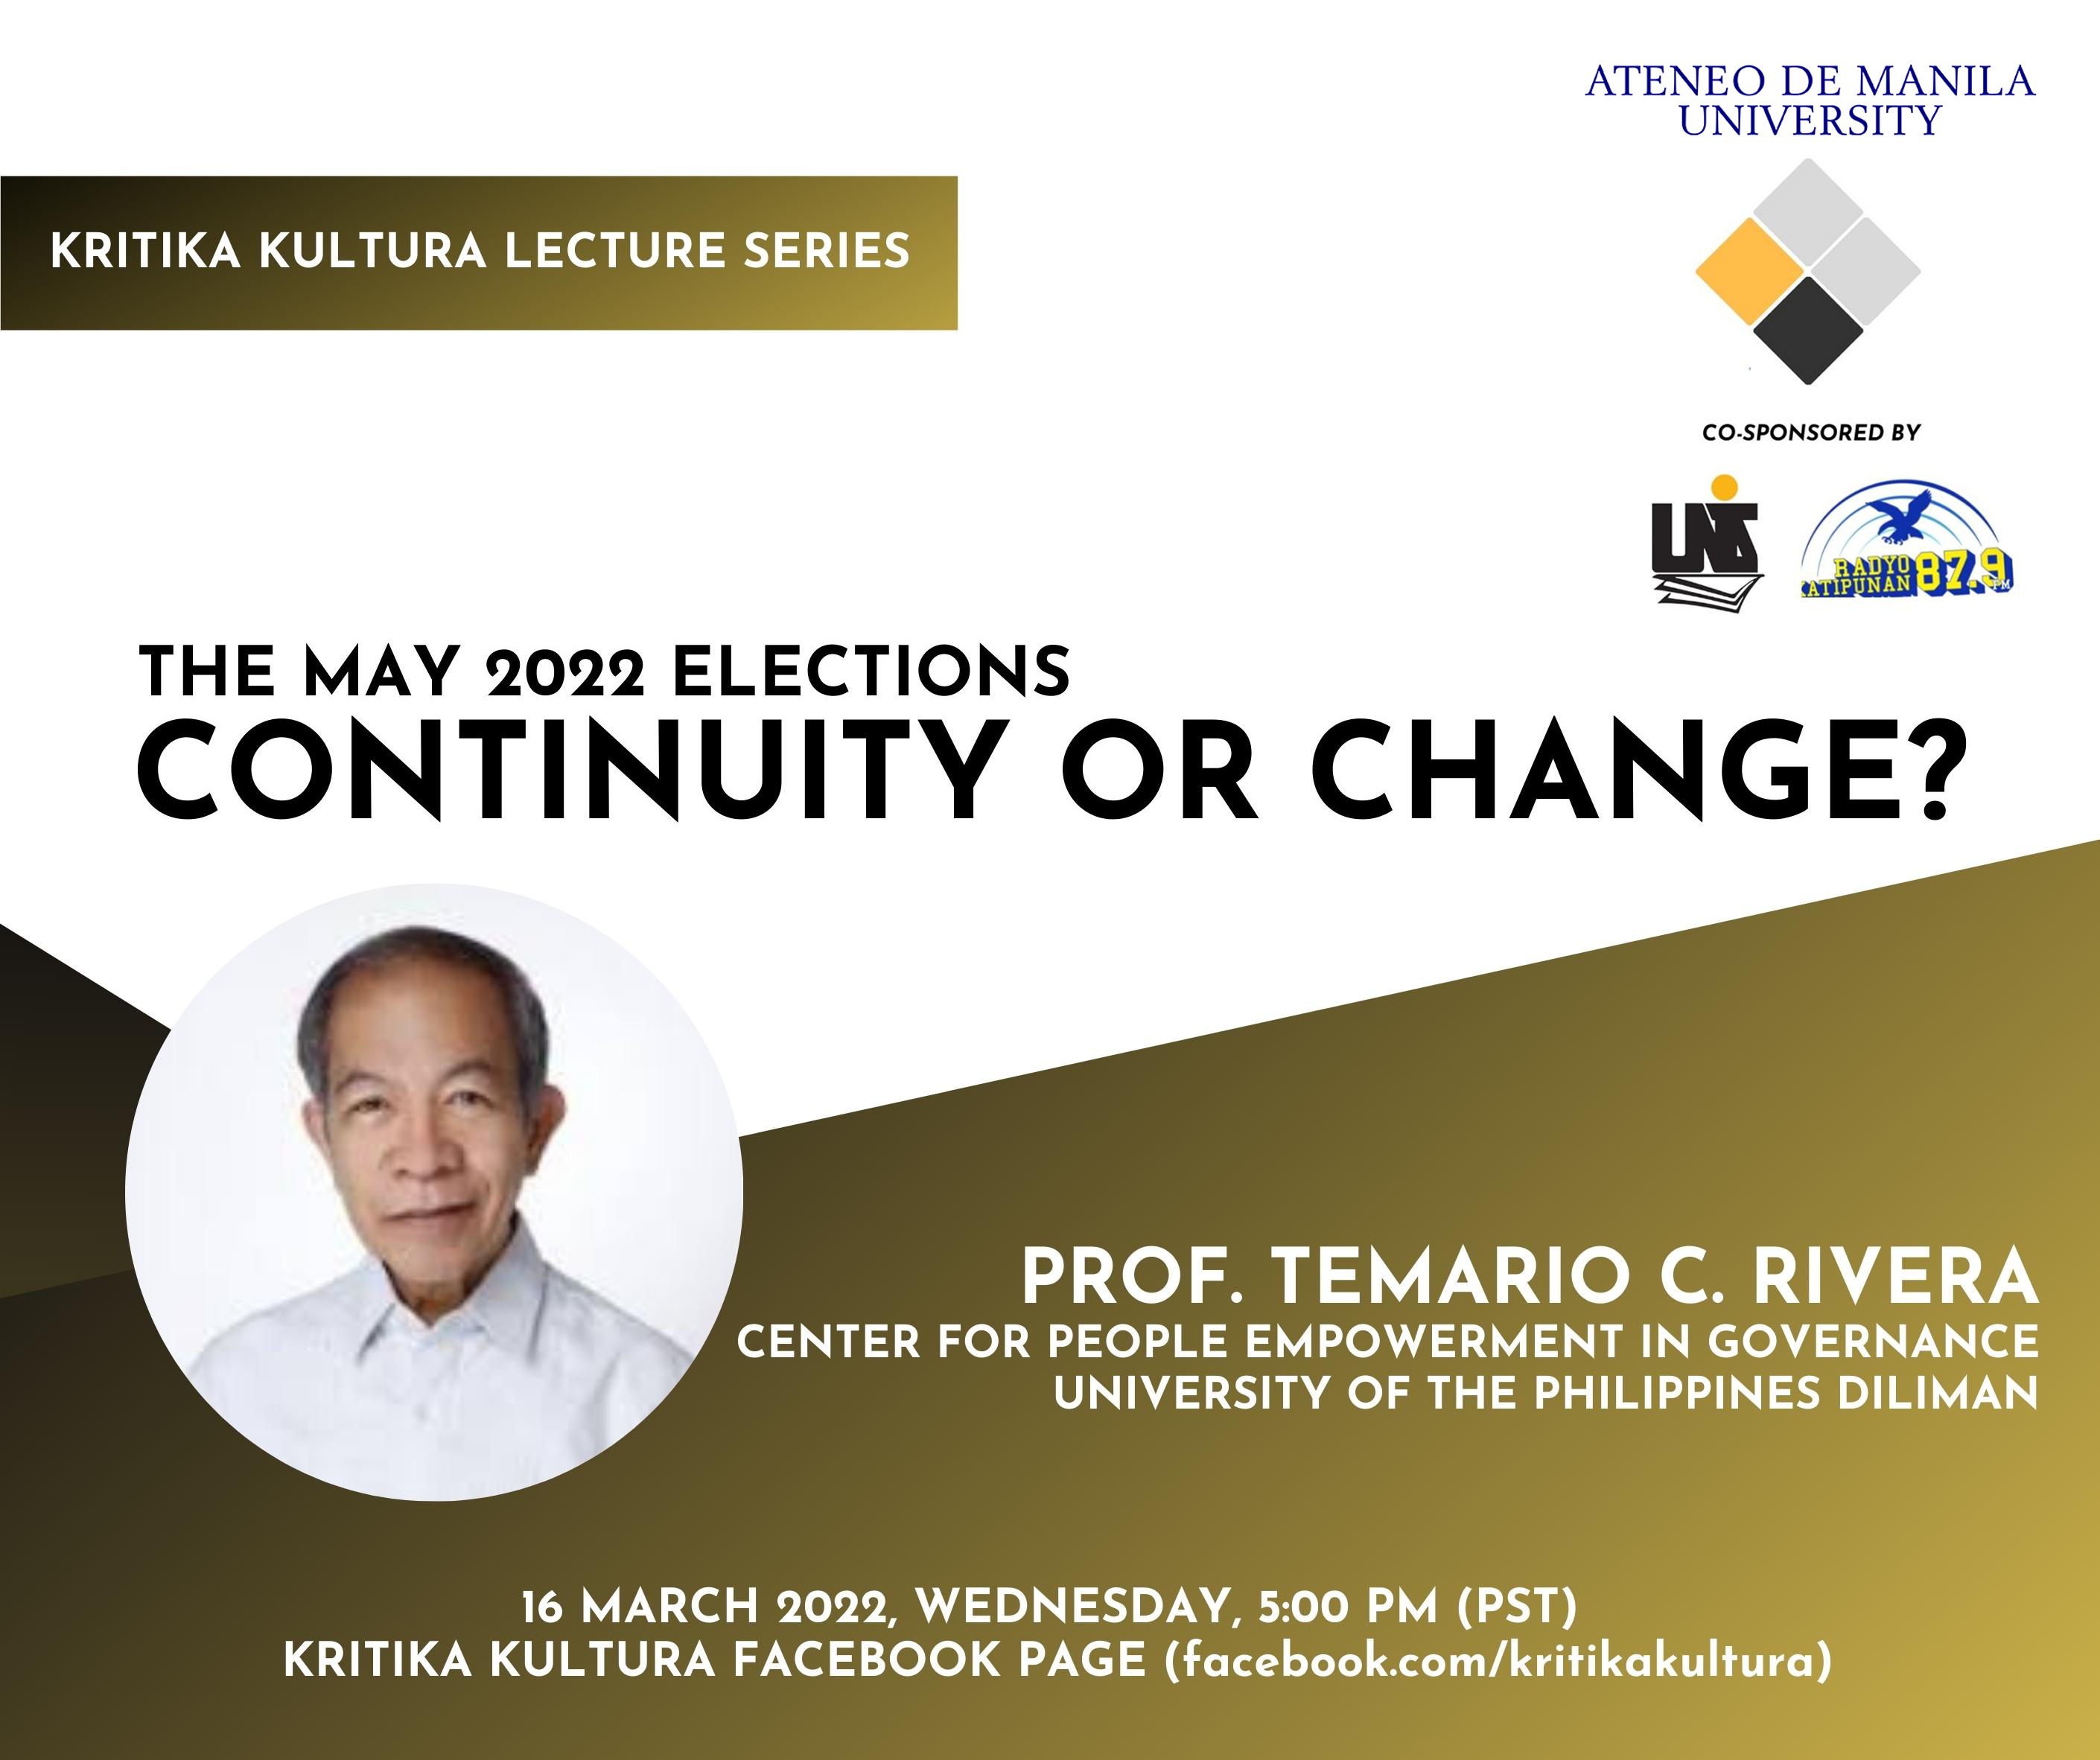 Kritika Kultura Lecture Series presents Temario C. Rivera’s The May 2022 Elections: Continuity or Change? 